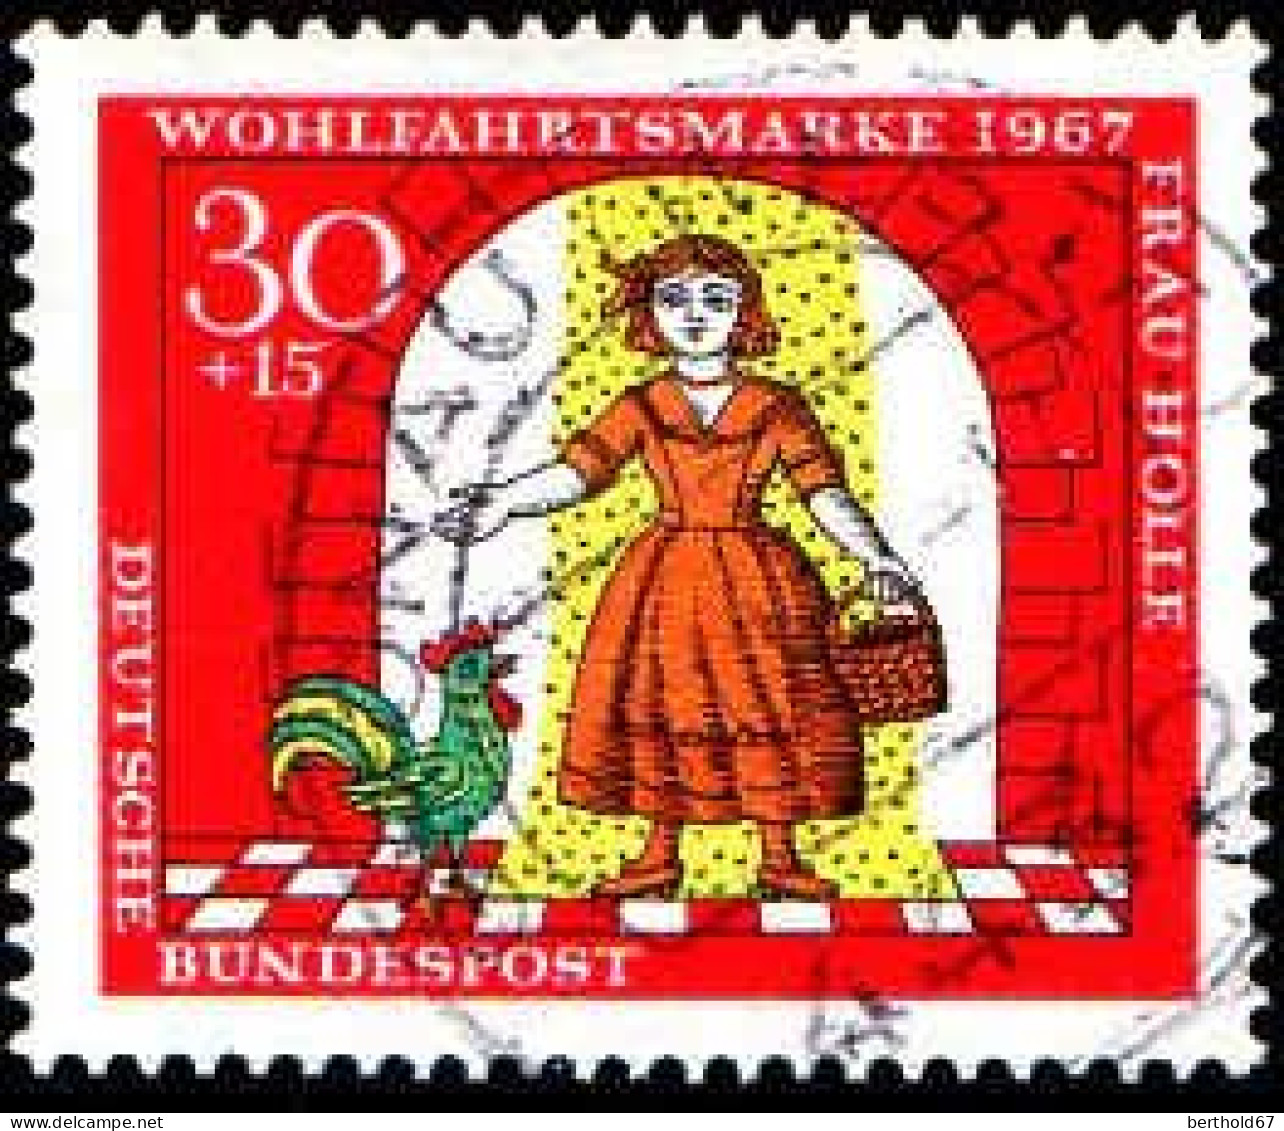 RFA Poste Obl Yv: 403/406 Contes Des Frères Grimm Frau Holle (Beau Cachet Rond) - Used Stamps